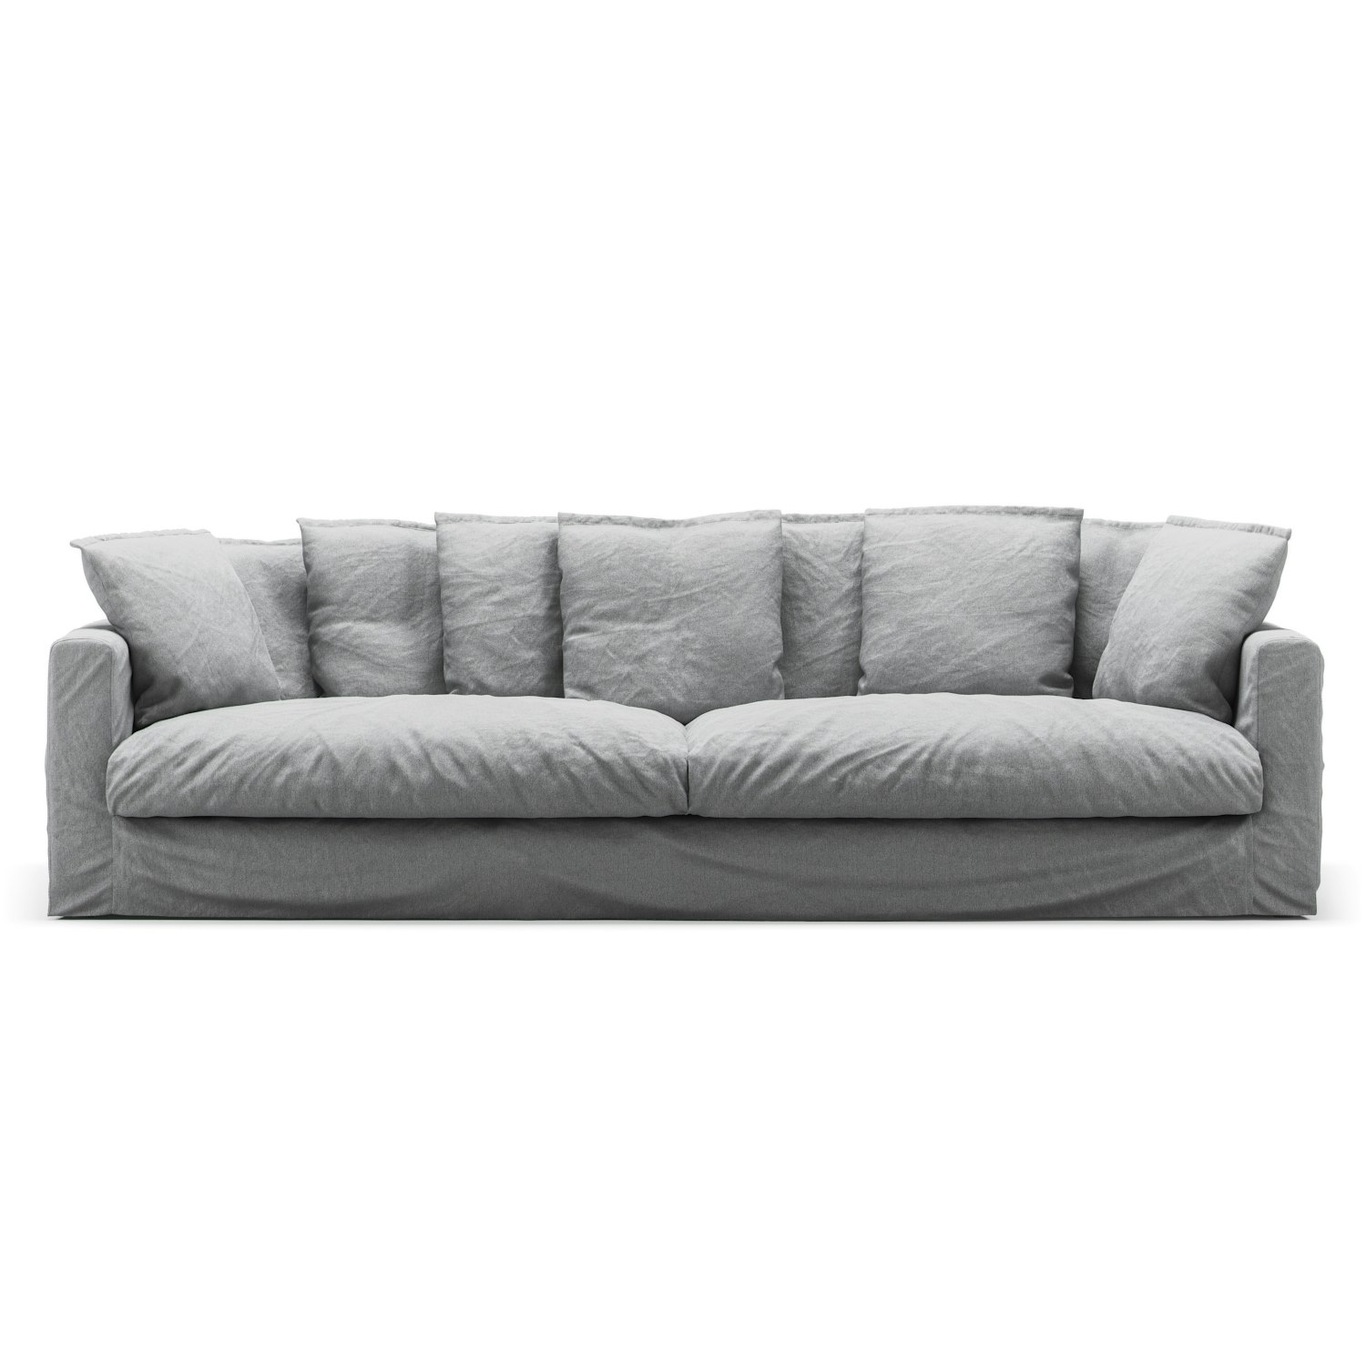 Le Grand Air Upholstery 4-Seater Cotton, Light Grey